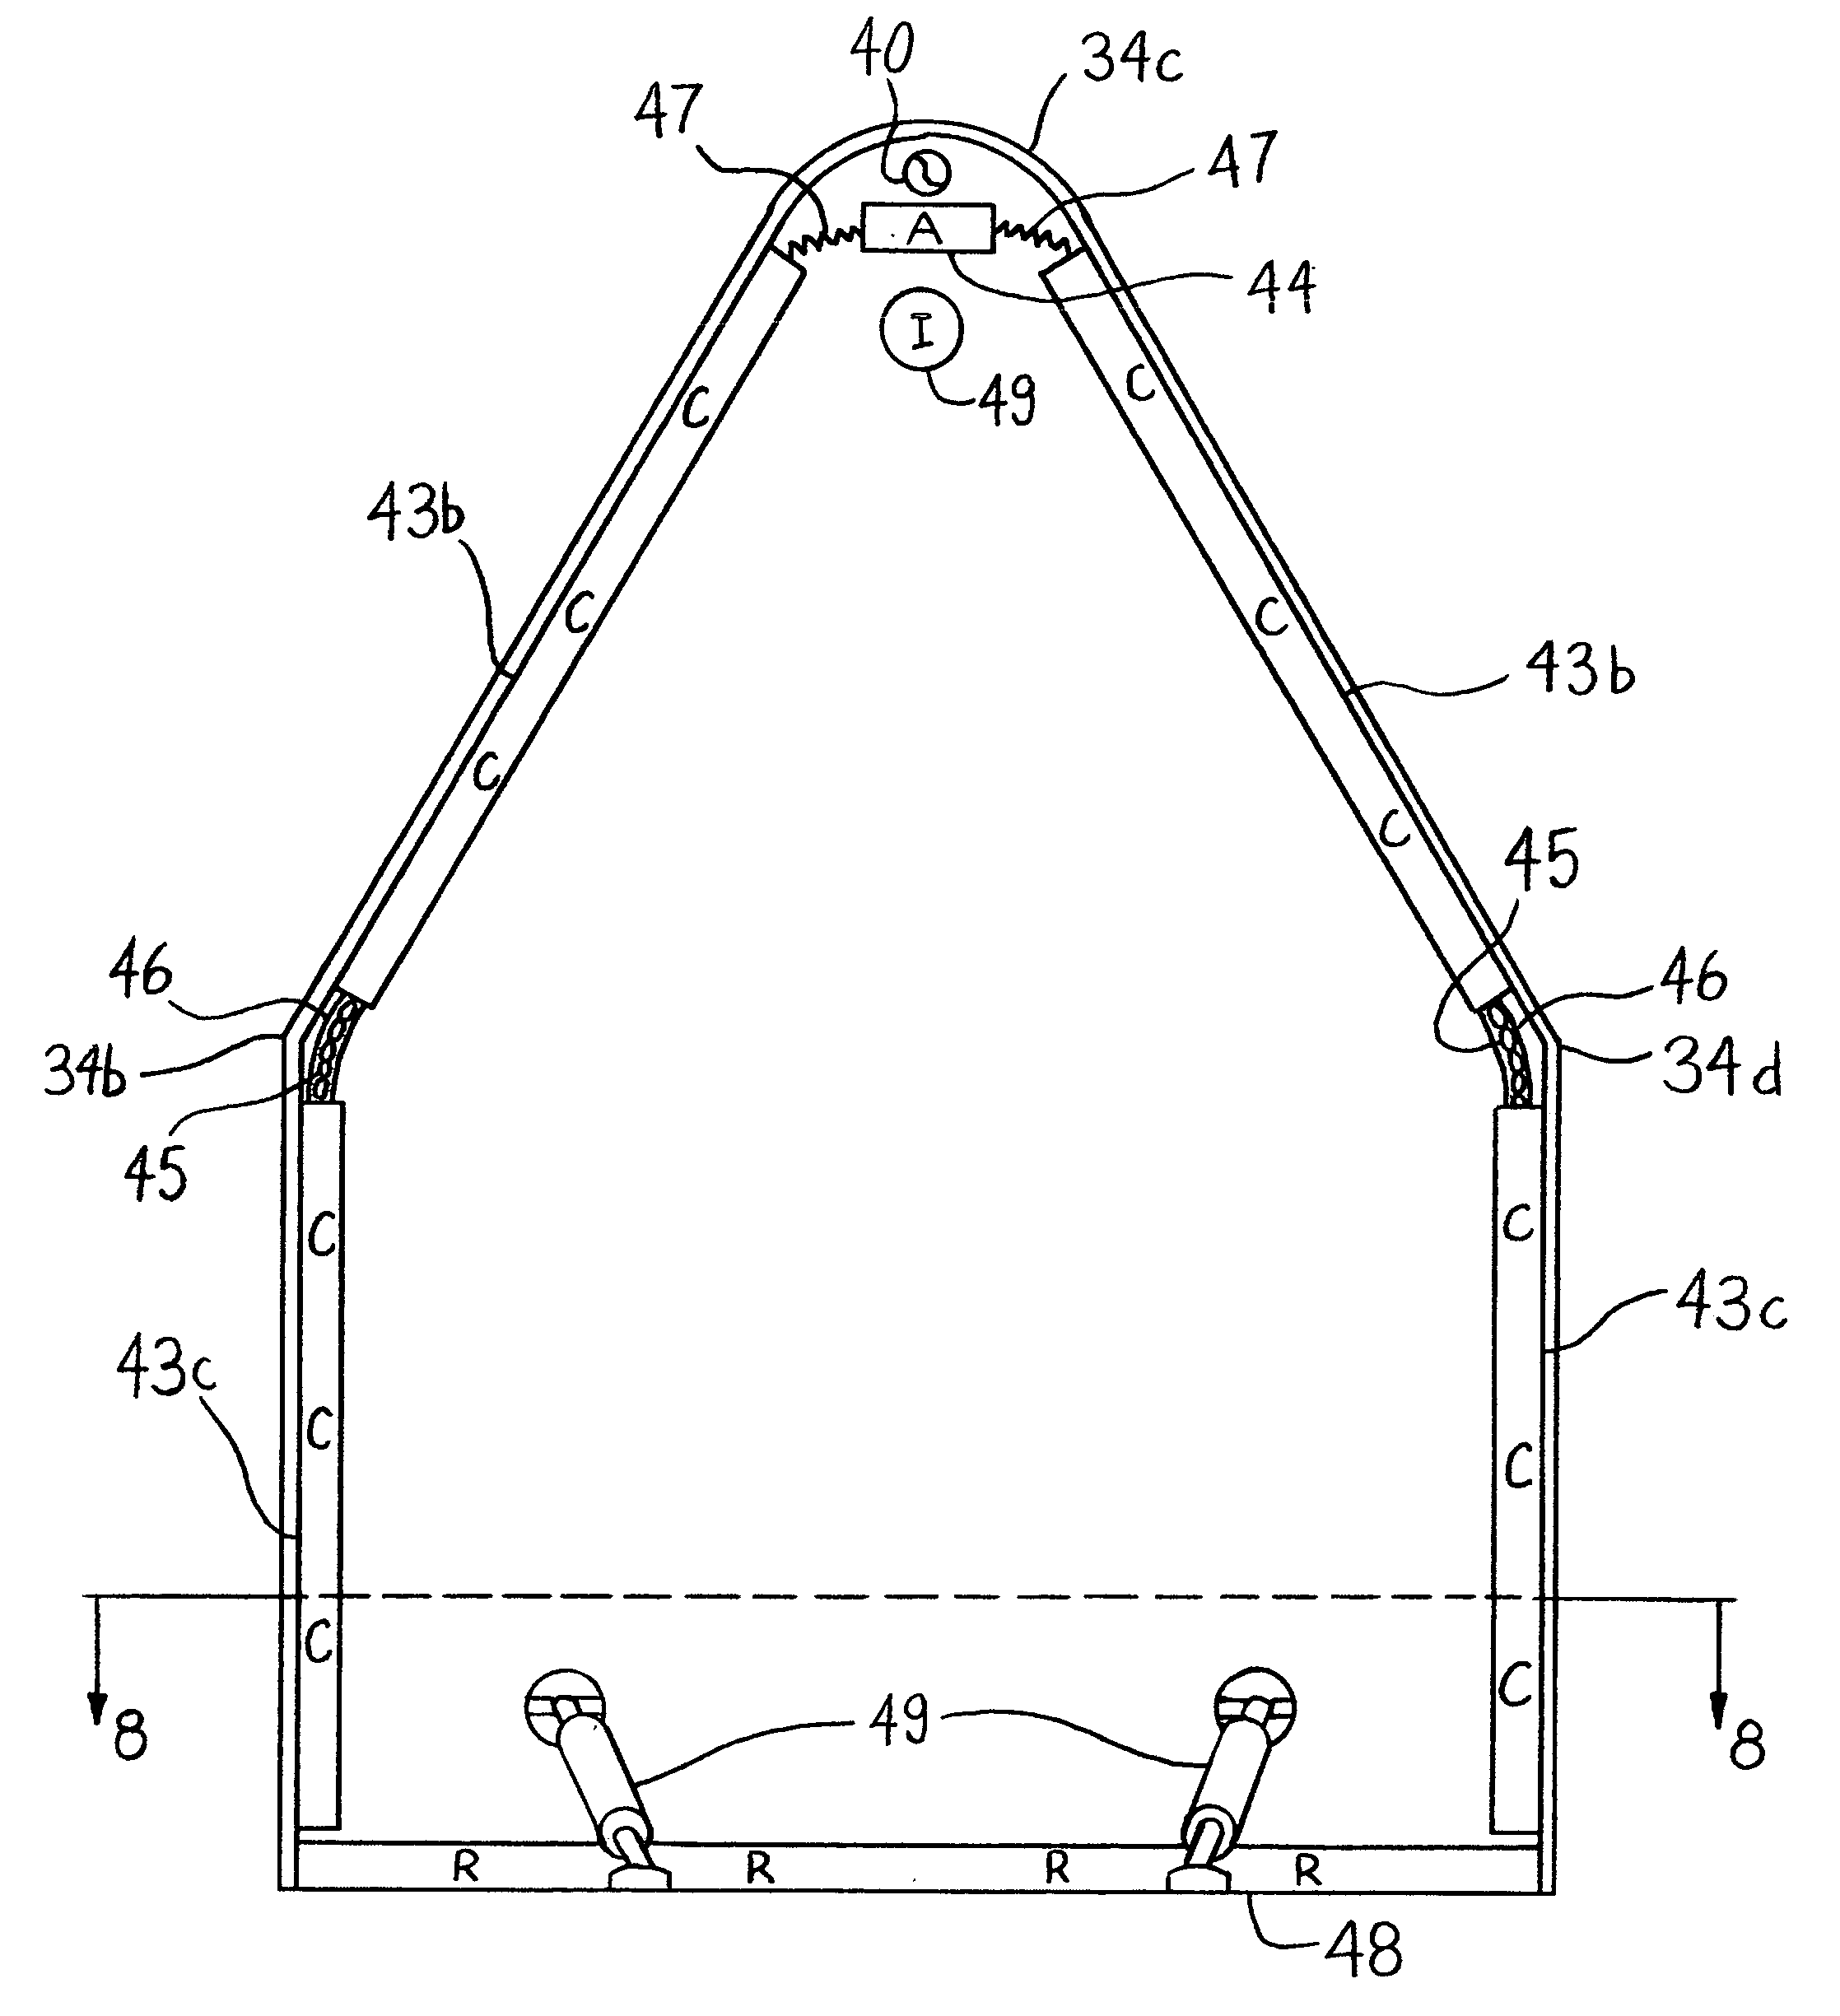 Payload fairing separation system